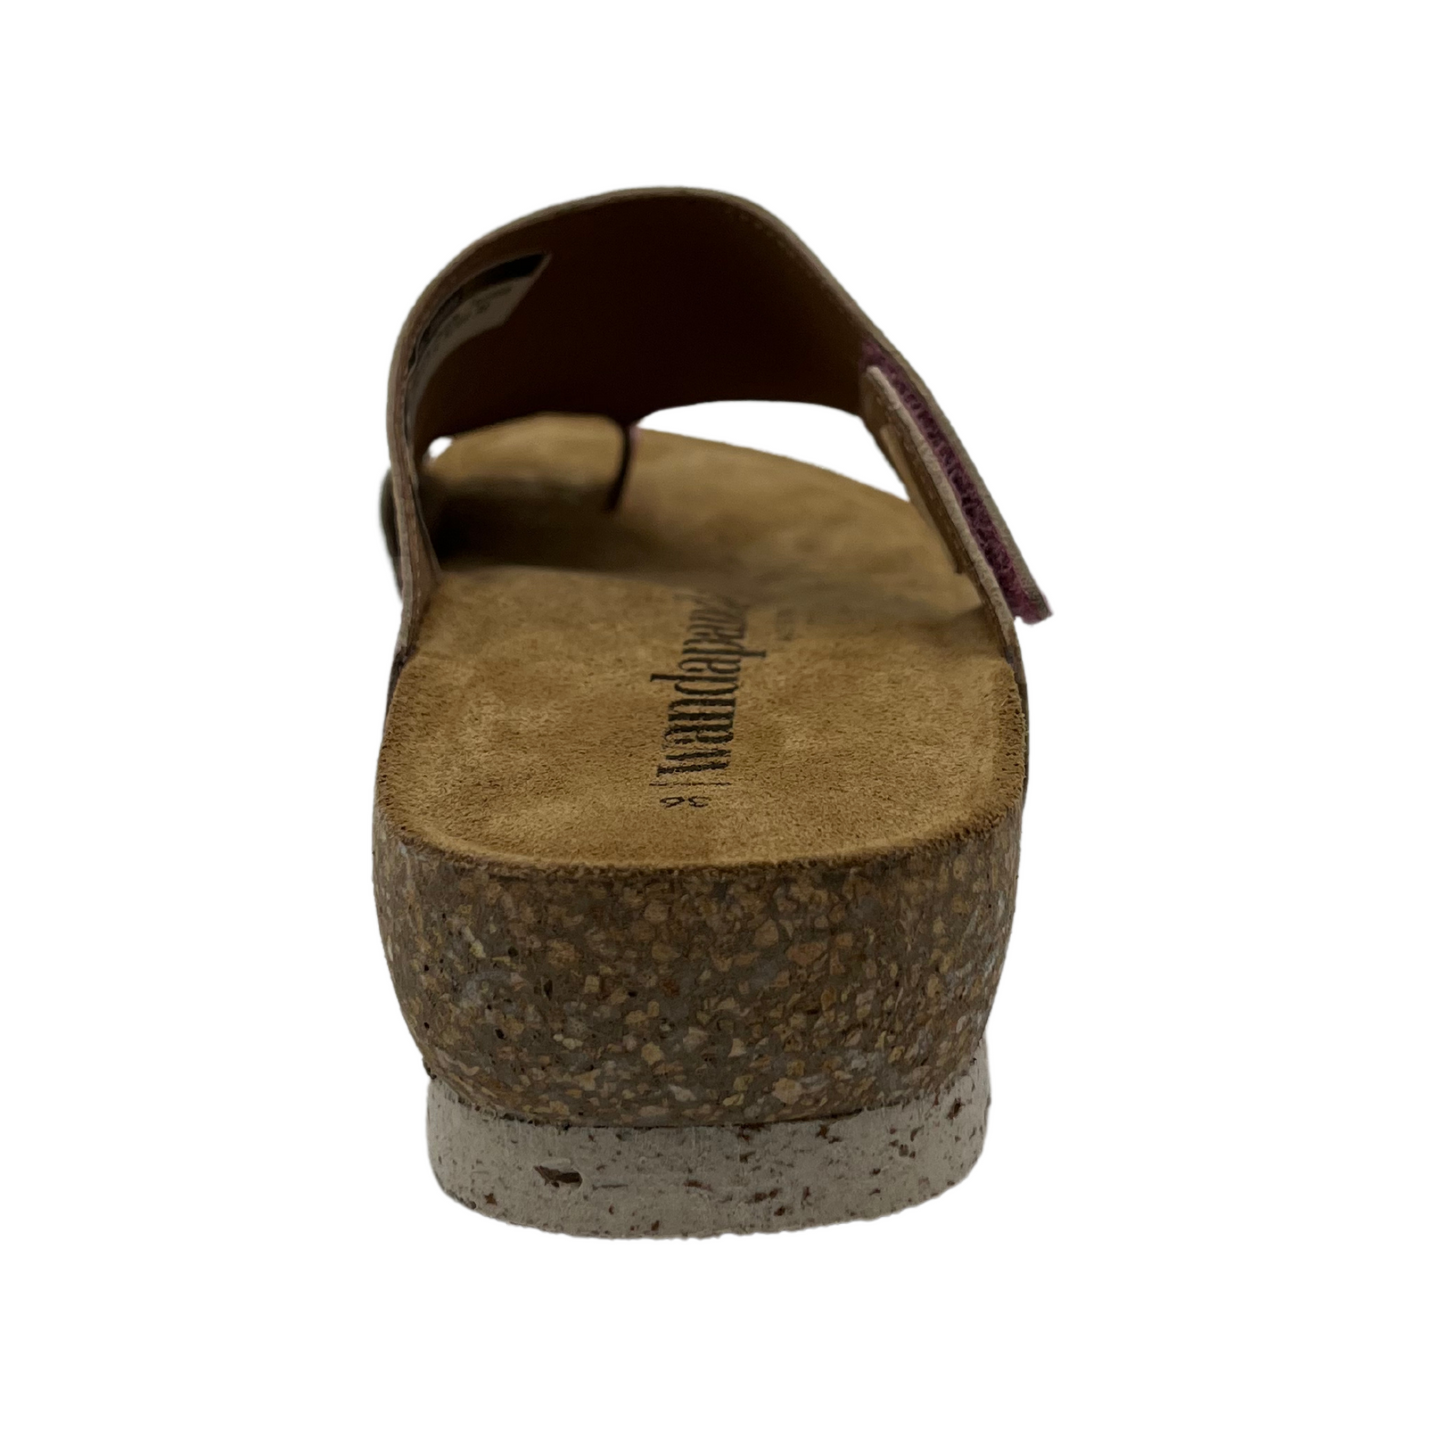 Back view of leather sandal with cork footbed